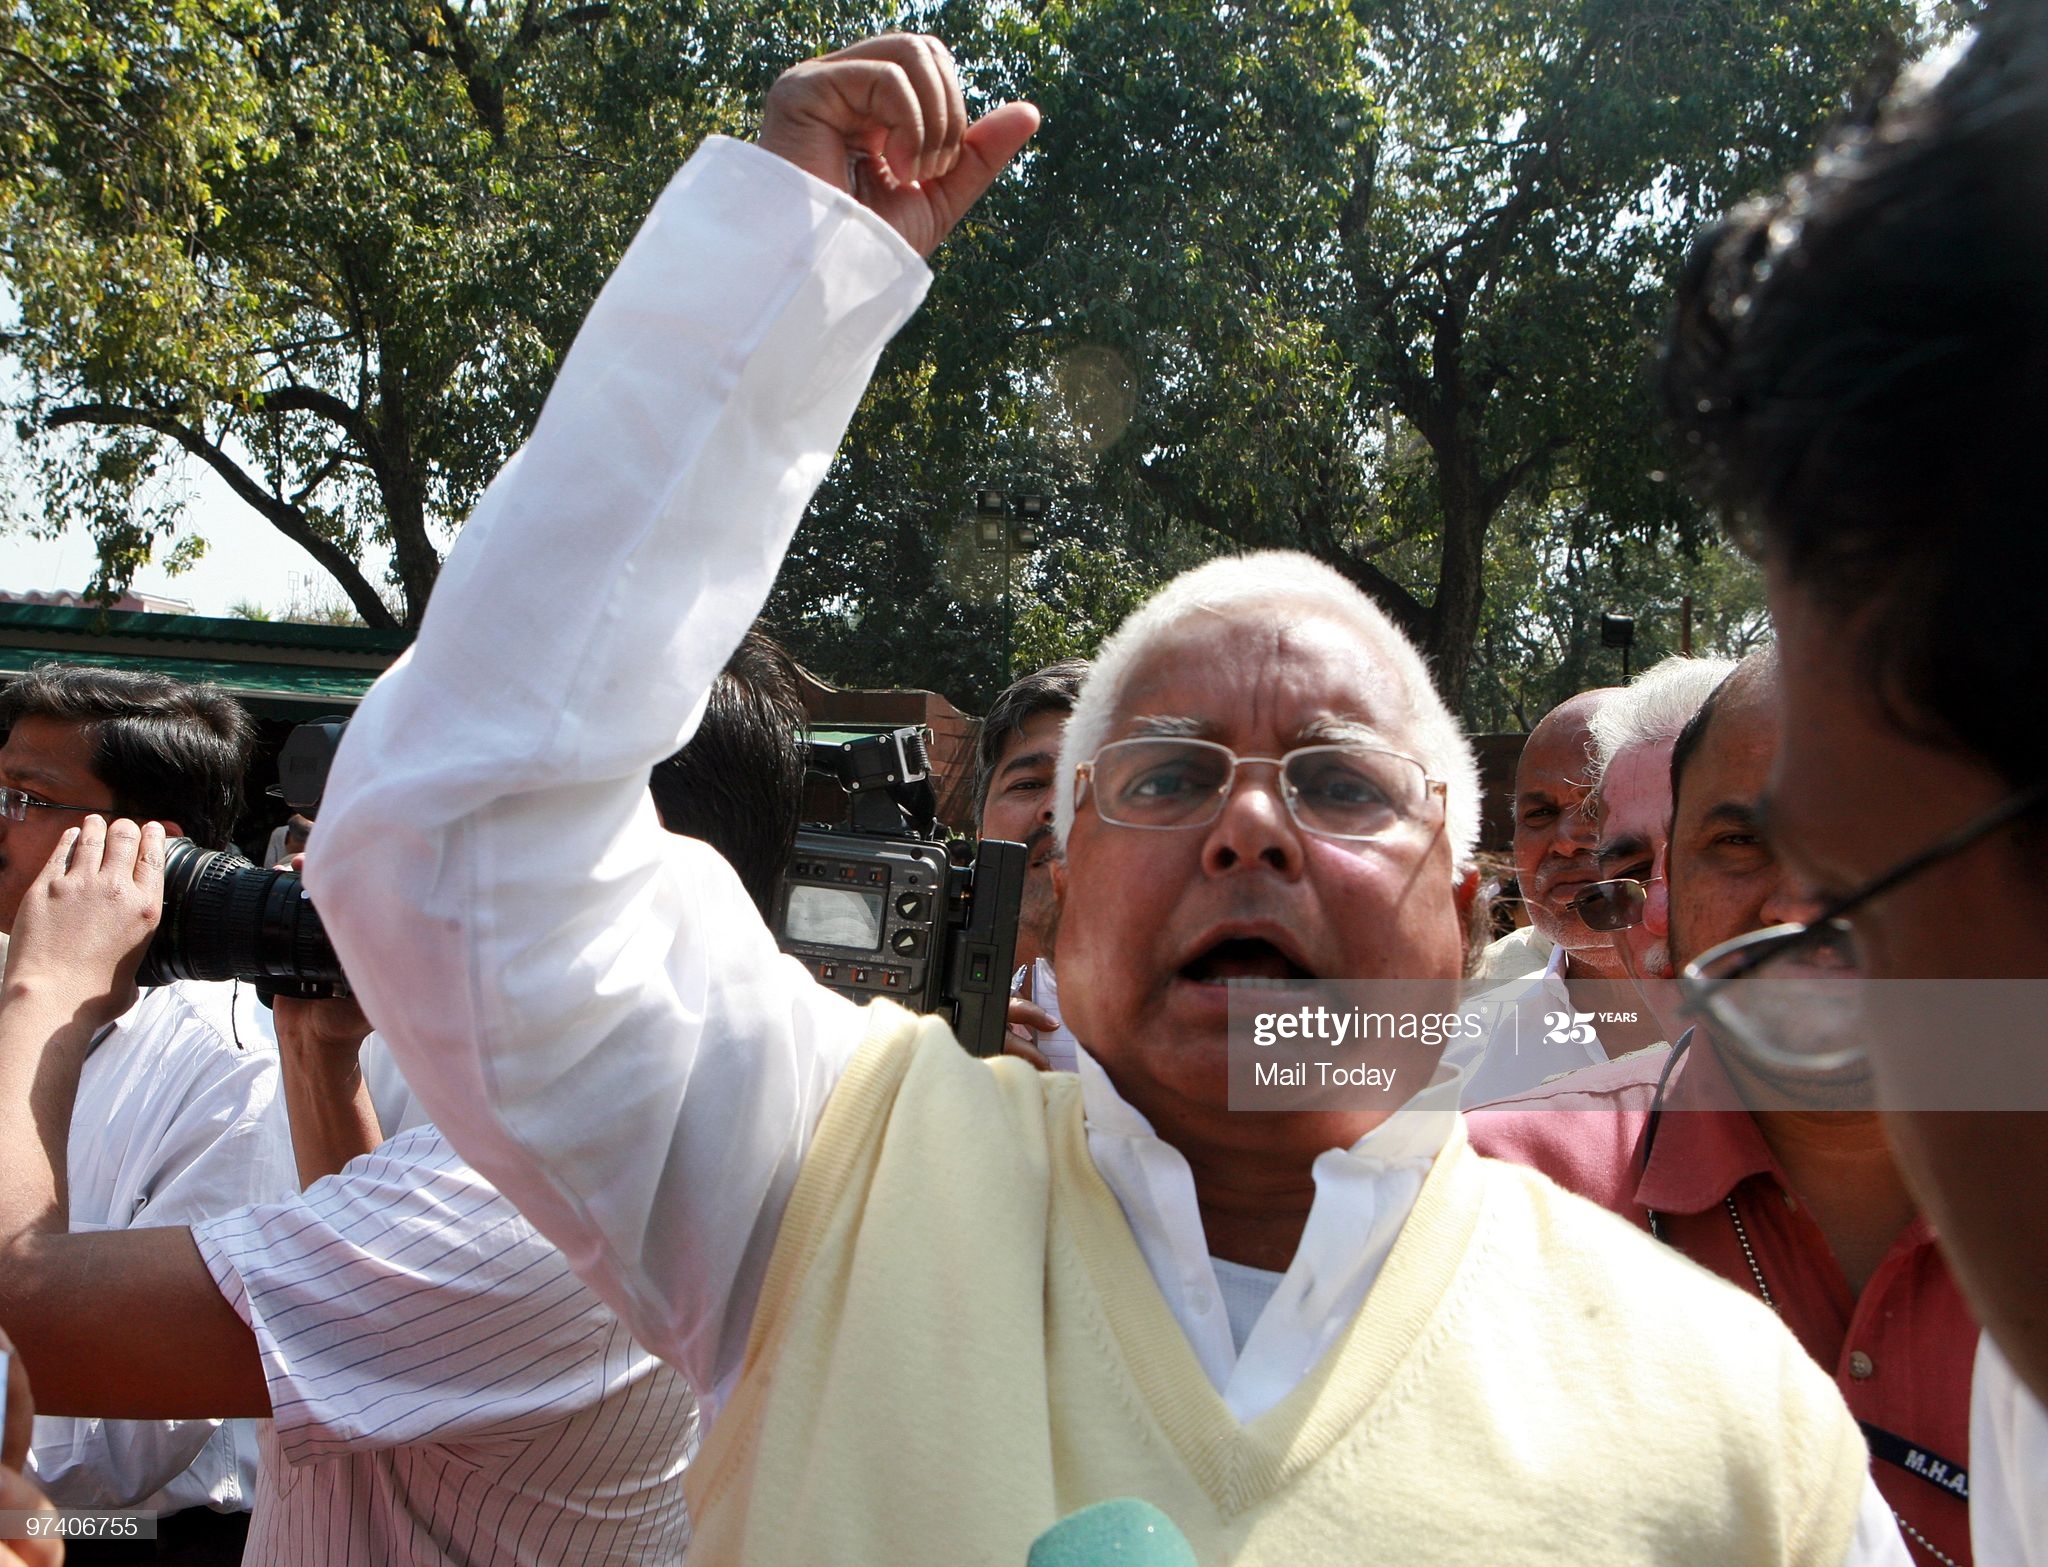 NEW DELHI, INDIA � FEBRUARY 26: Senior political leader Lalu Prasad Yadav addresses the media after the opposition leaders walked out of the parliament house to protest against the Annual Budget 2010-2011 in New Delhi on February 26, 2010. (Photo by Kaushik Roy/The India Today Group via Getty Images)